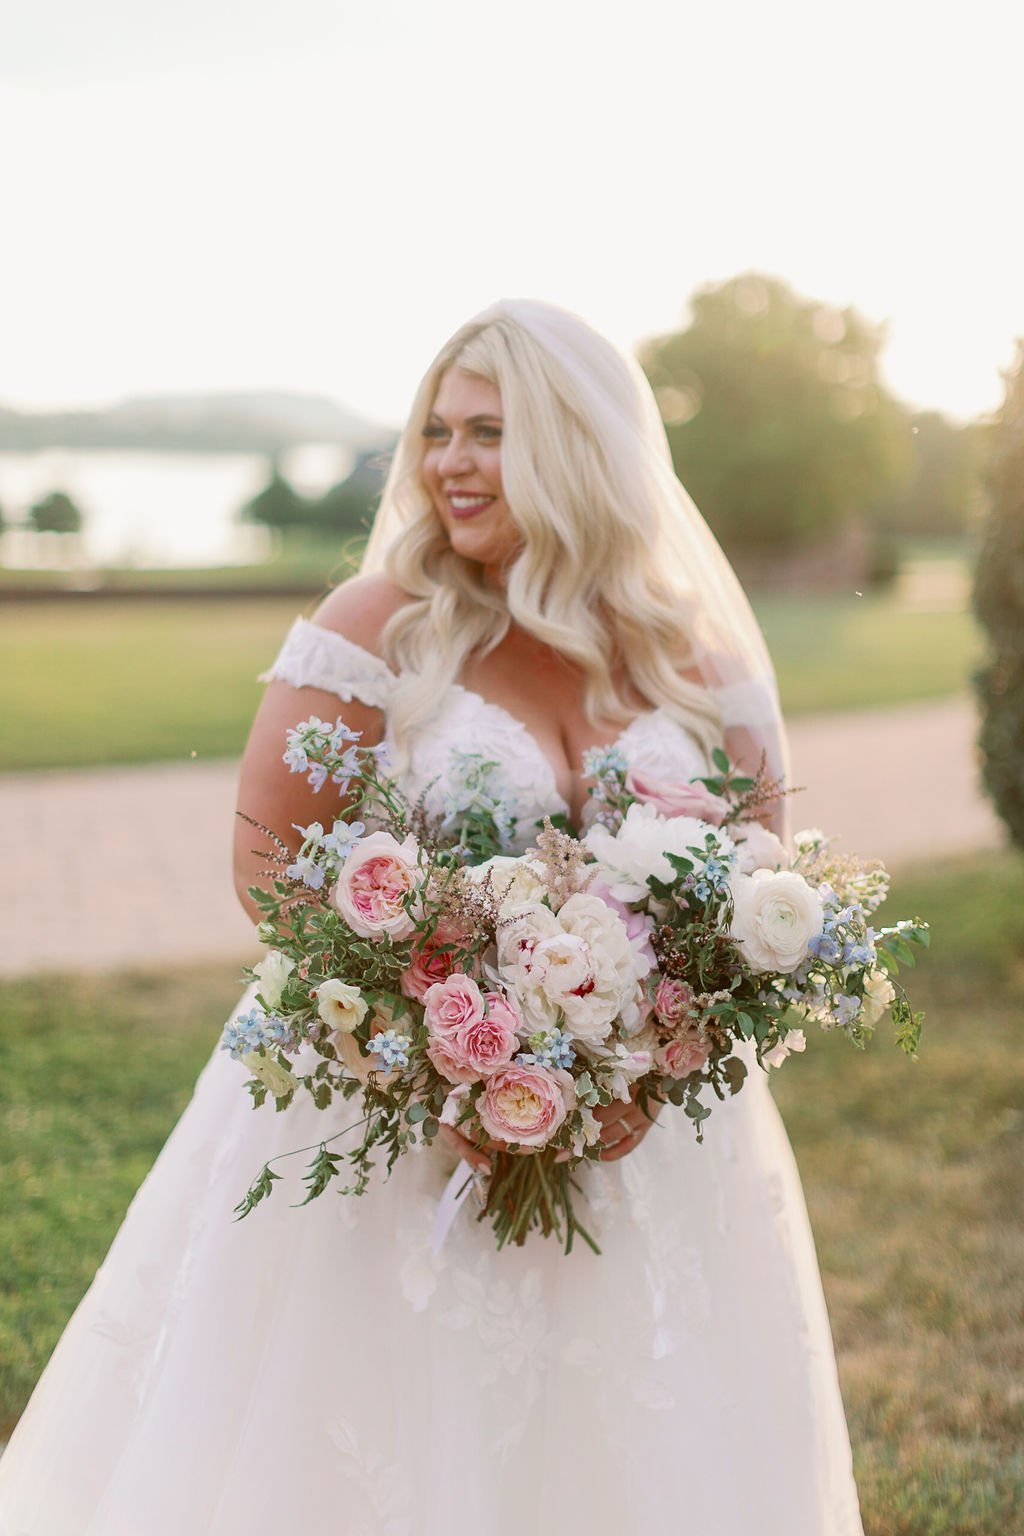 A lush bridal bouquet filled with hues of blush, pink, ivory, and hints of French blue. Garden roses, majolica spray roses, champagne roses, peonies, ranunculus, delphinium, and spirea make up this fairytale bouquet. Designed by Rosemary & Finch in N